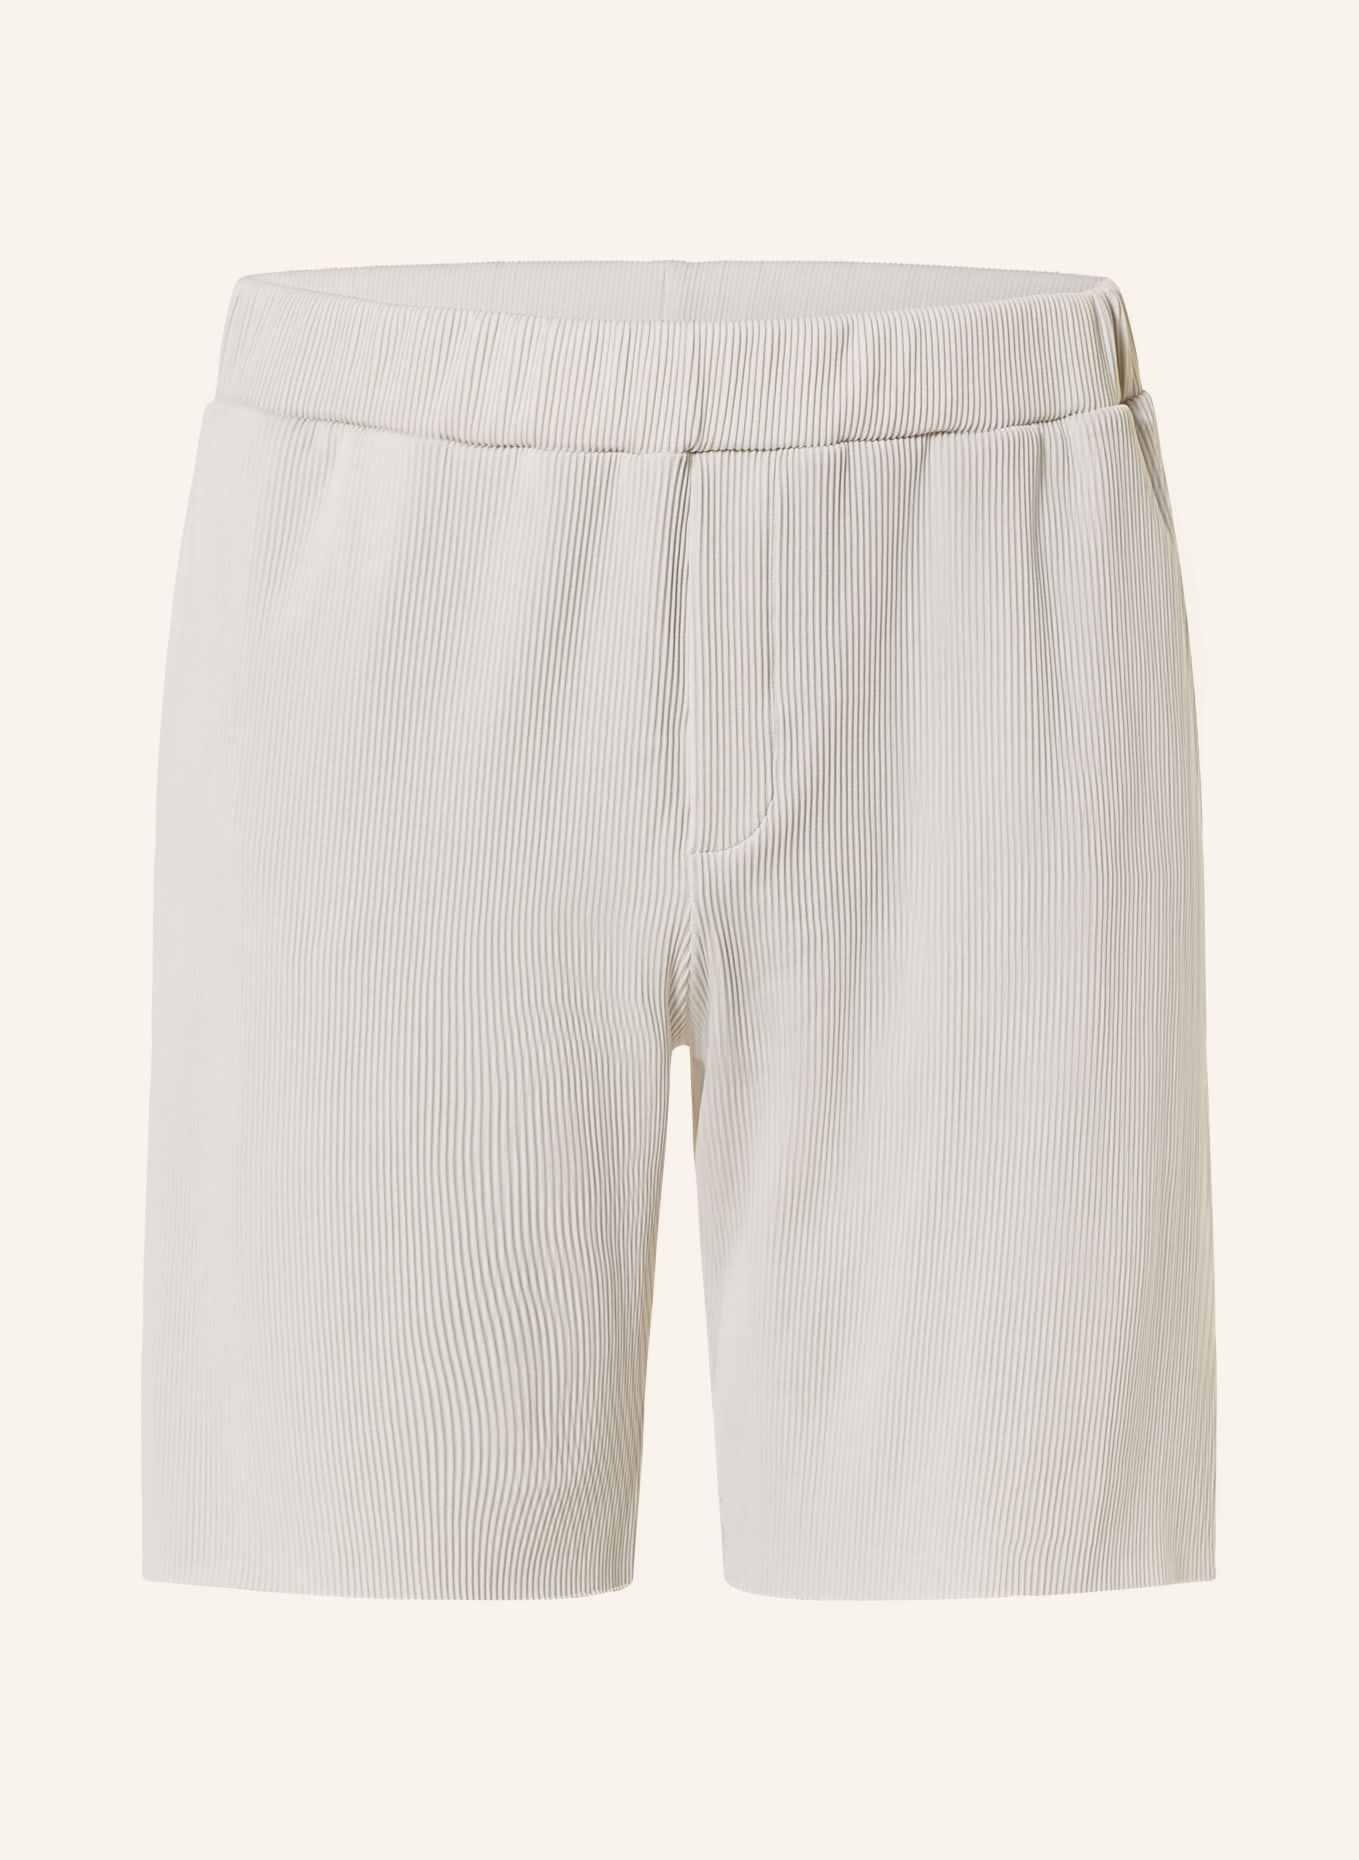 REISS Shorts CONOR, Color: LIGHT GRAY (Image 1)